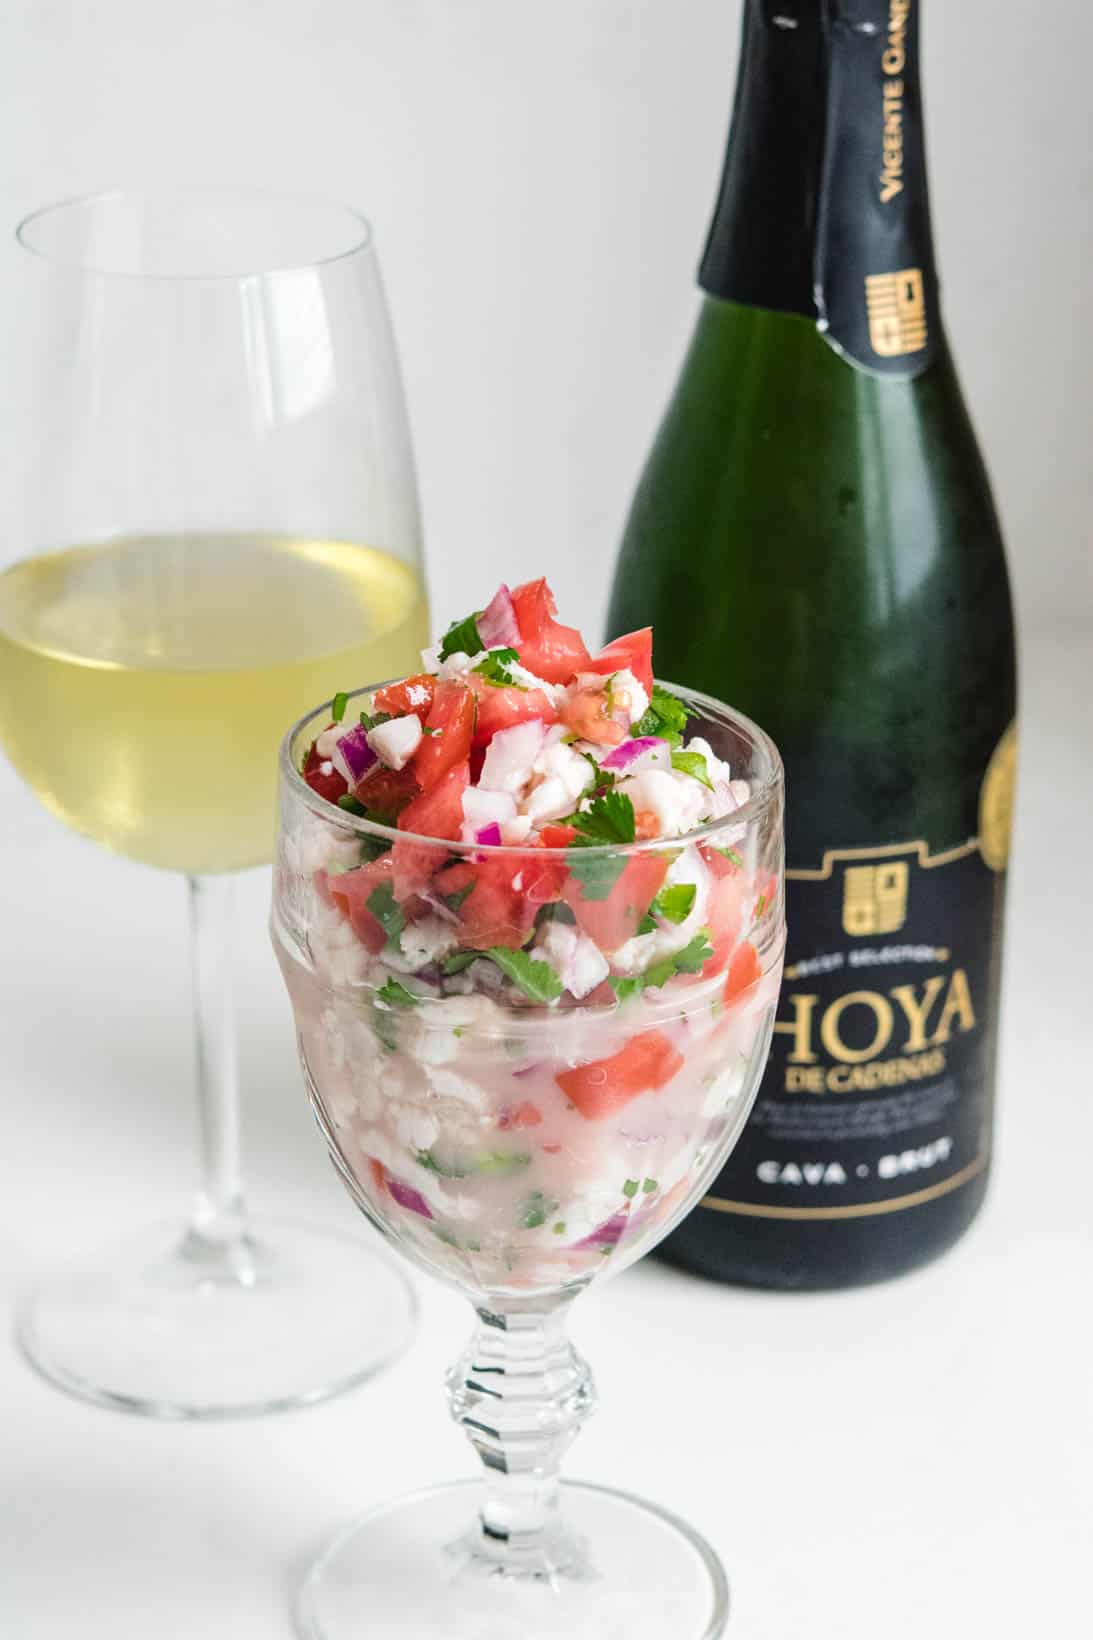 Ceviche in a goblet with a glass of Cava sparkling wine